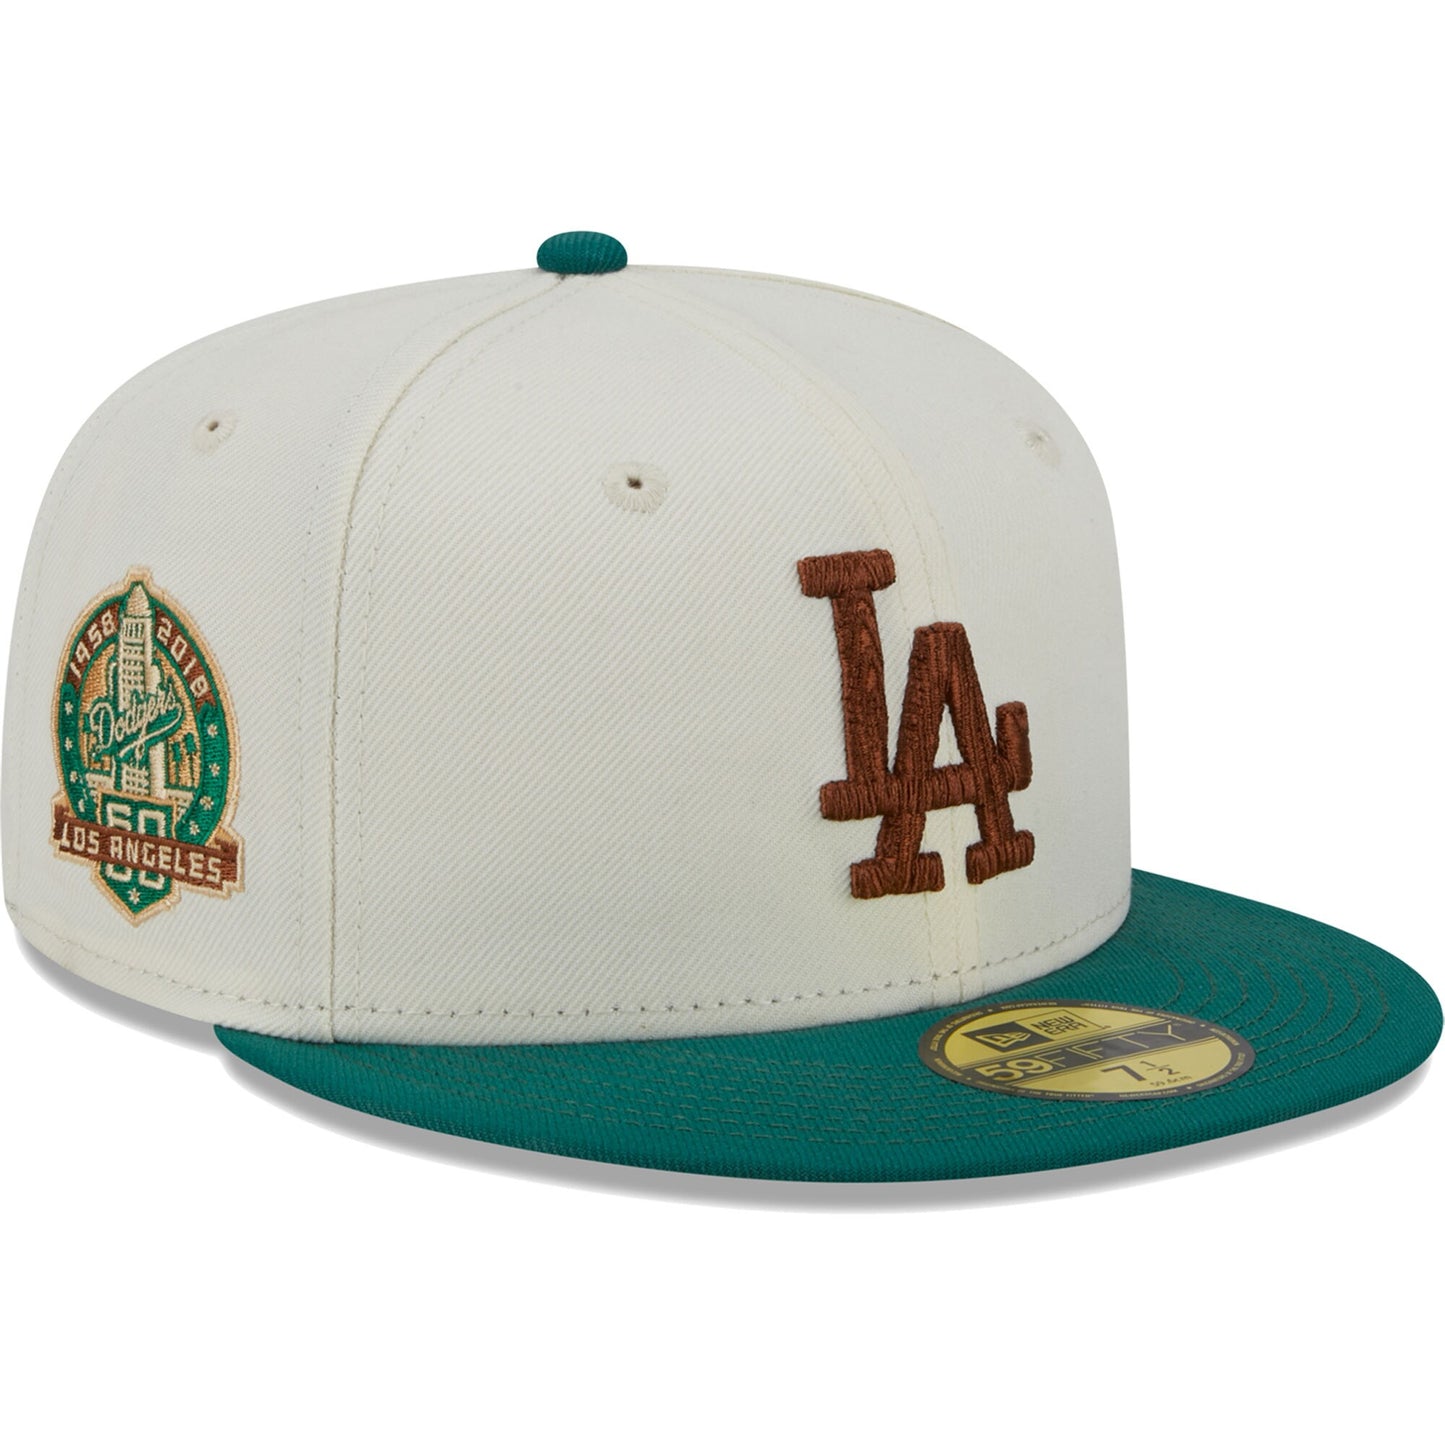 Los Angeles Dodgers New Era Cooperstown Collection Camp 59FIFTY Fitted Hat - White